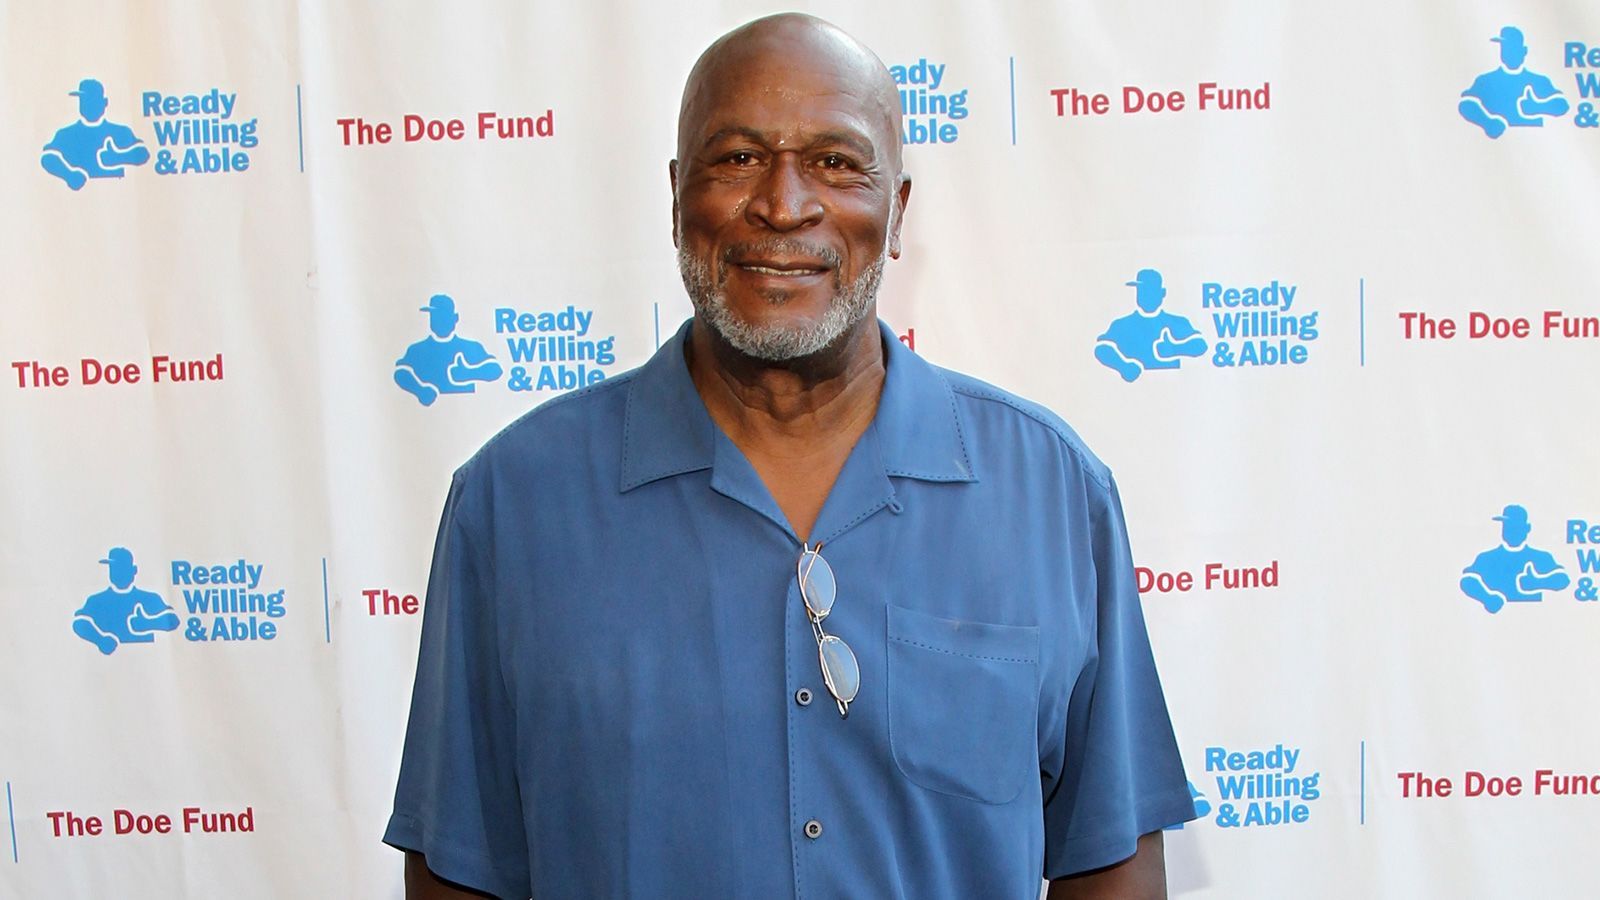 John Amos Alleged Neglect Of Care Case Under Investigation By LAPD